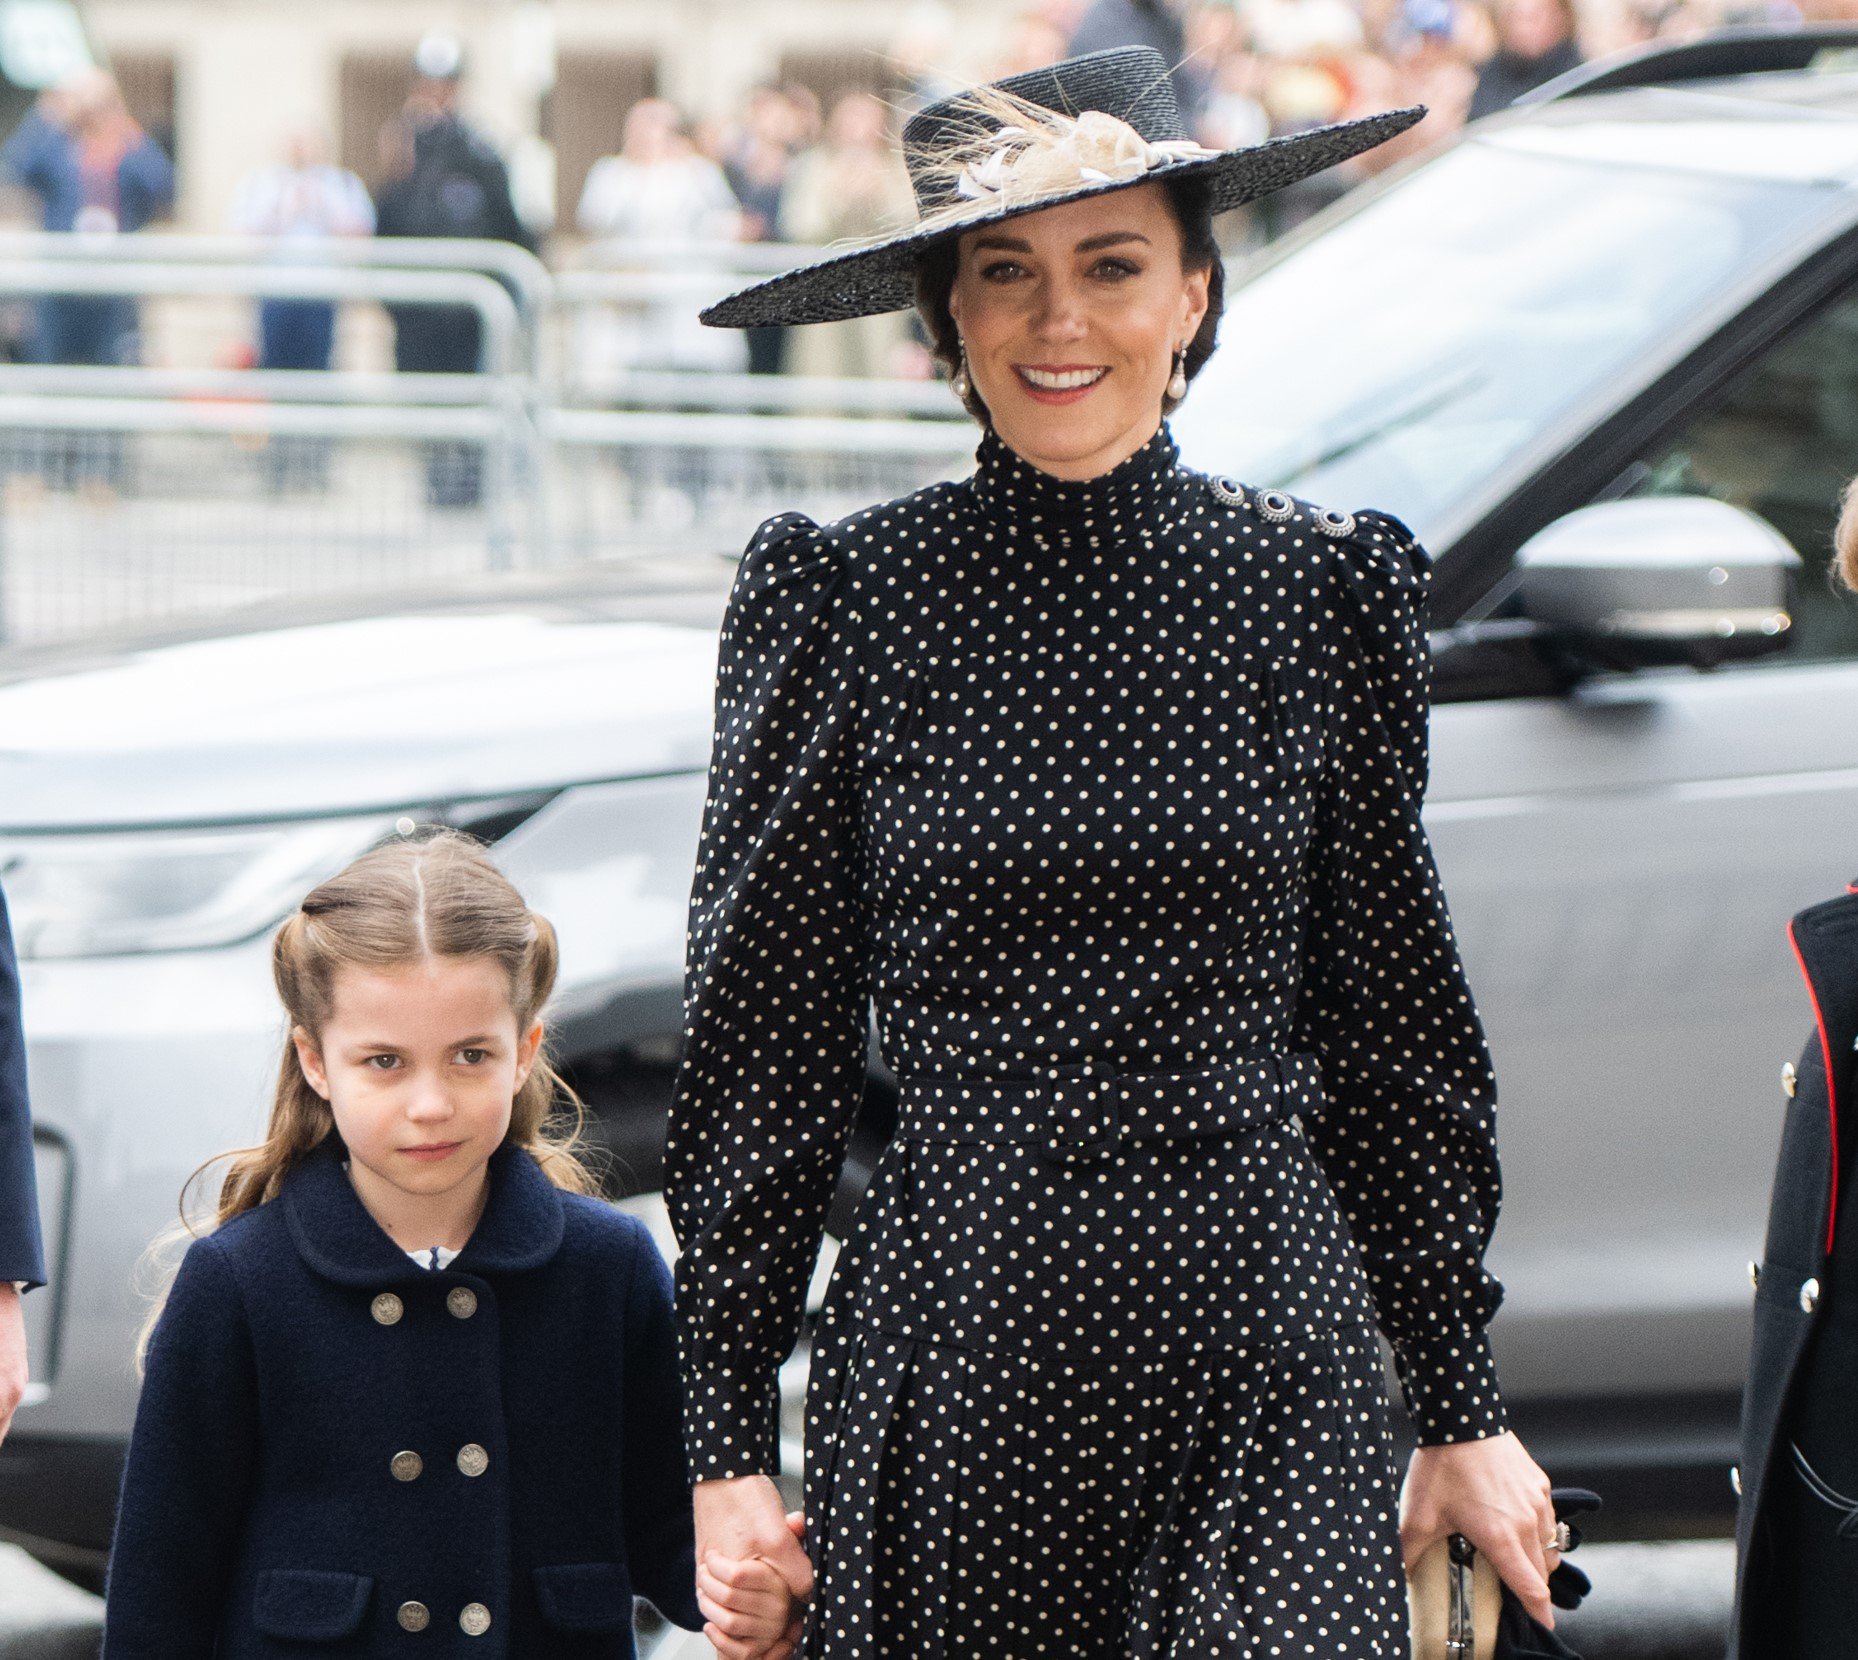 Princess Charlotte, who recently dressed just like Kate Middleton, holding her mom's hand as they arrive to Prince Philip's memorial service